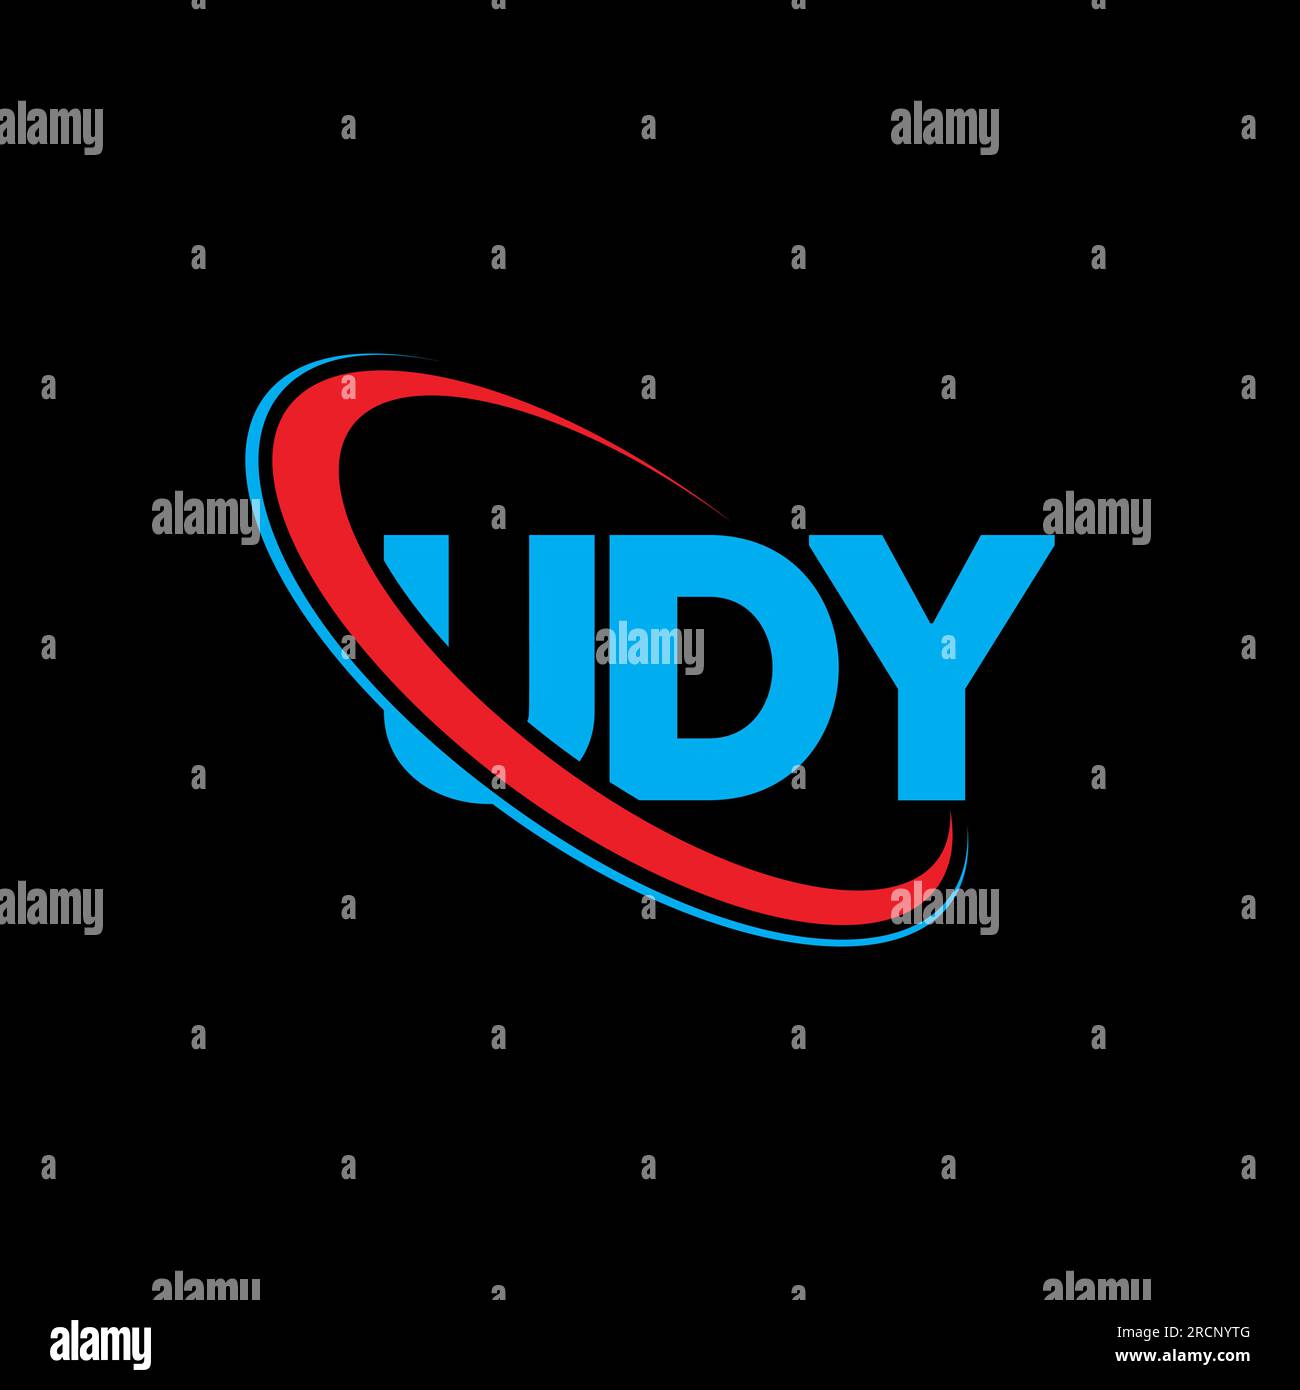 UDY logo. UDY letter. UDY letter logo design. Initials UDY logo linked with circle and uppercase monogram logo. UDY typography for technology, busines Stock Vector